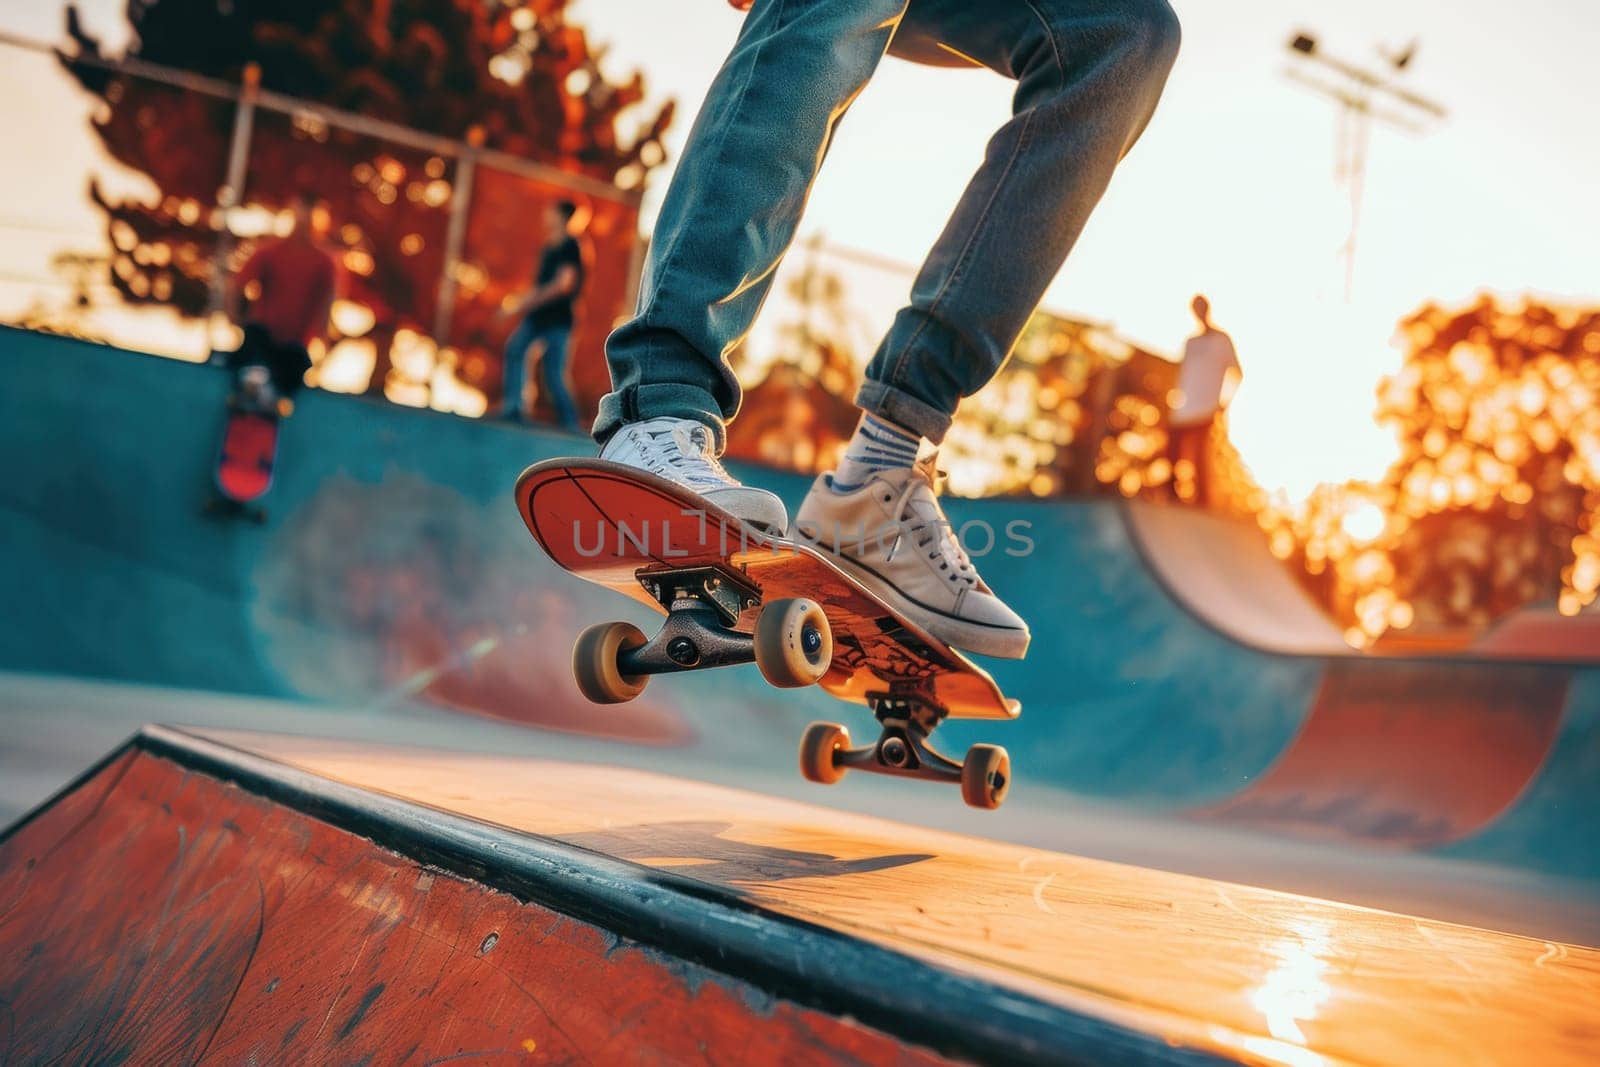 A skateboarder is riding a ramp at a skate park.